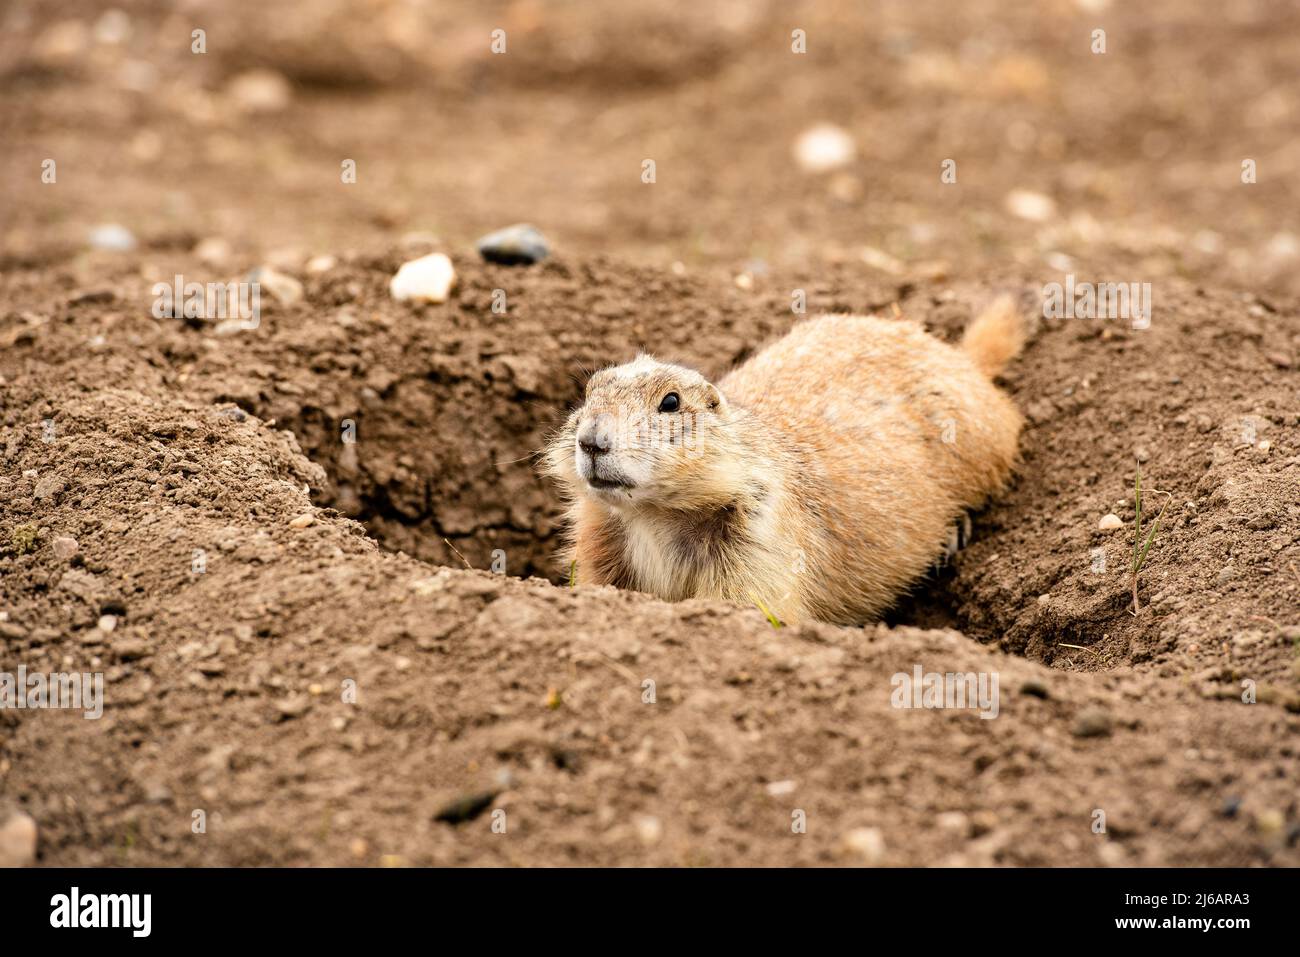 Close up Prairie Dog Town in Badlands National Park, South Dakota, small rodent on guard by burrow looking out for predators, alerting colony, grassla Stock Photo